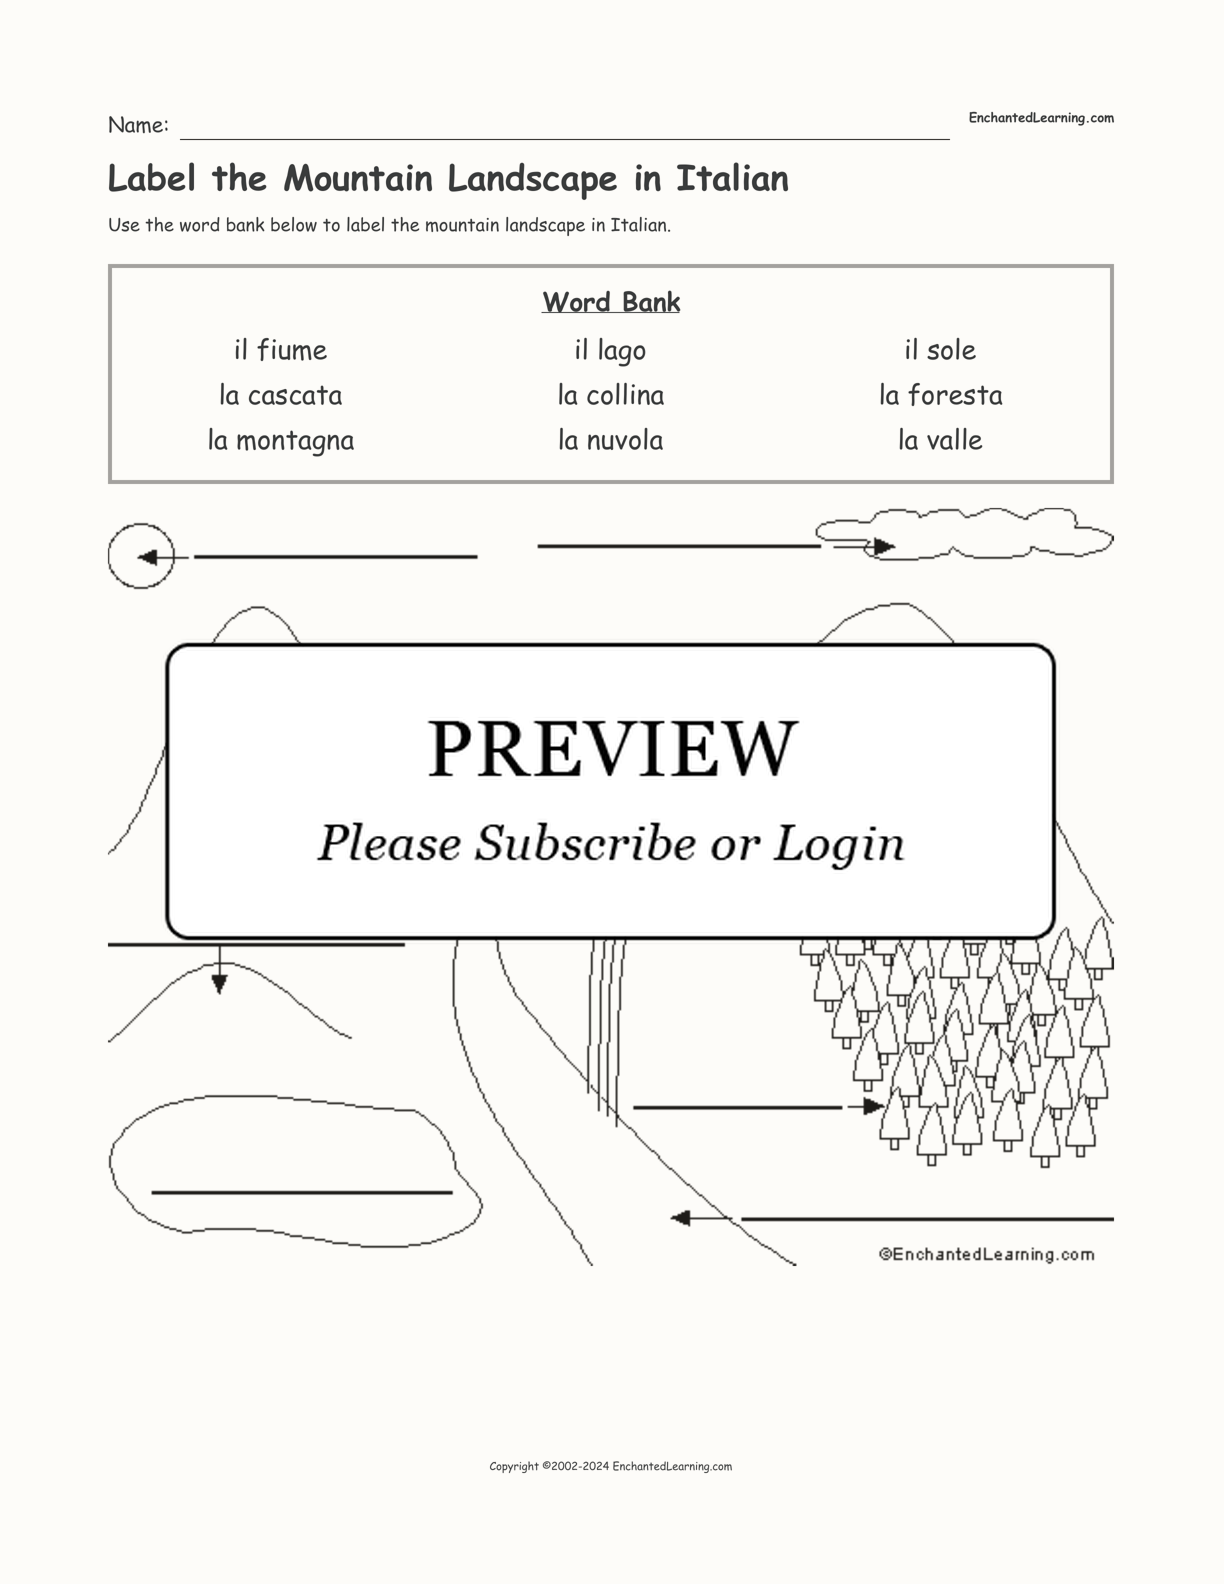 Label the Mountain Landscape in Italian interactive worksheet page 1